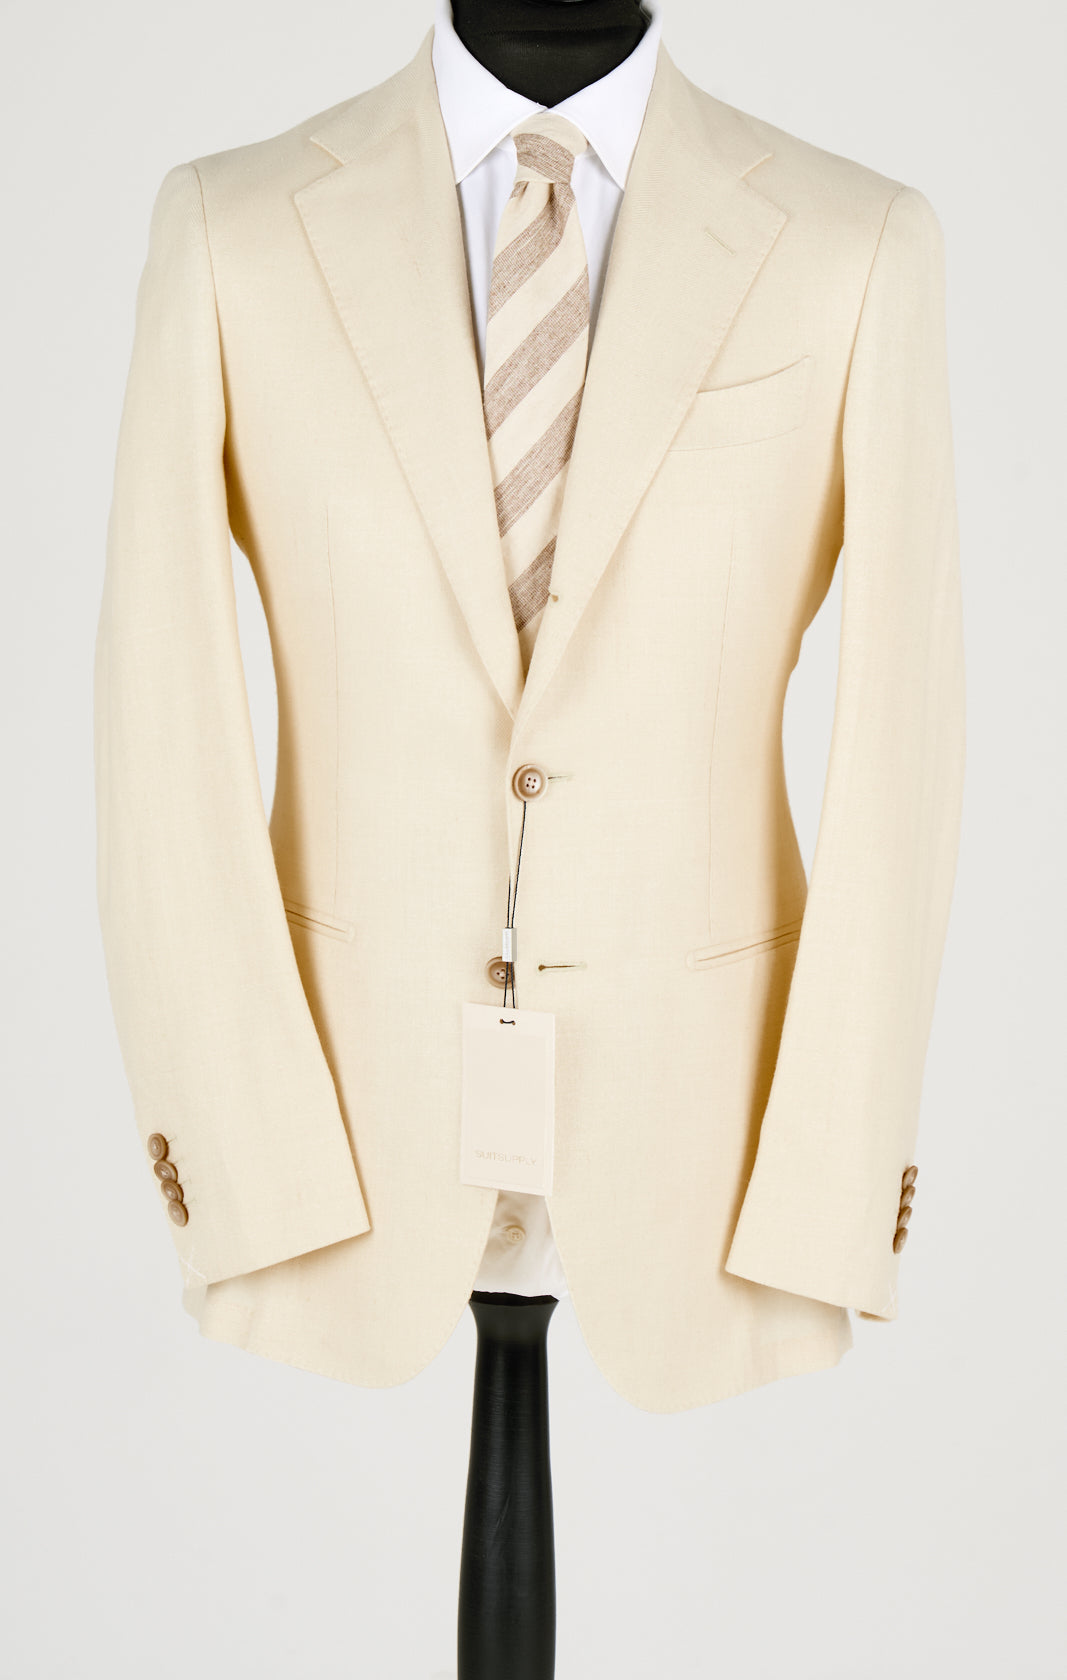 New Suitsupply Havana Off White Wool, Tussah Silk, Linen Suit - Size 36R, 38S, 40S, 42S